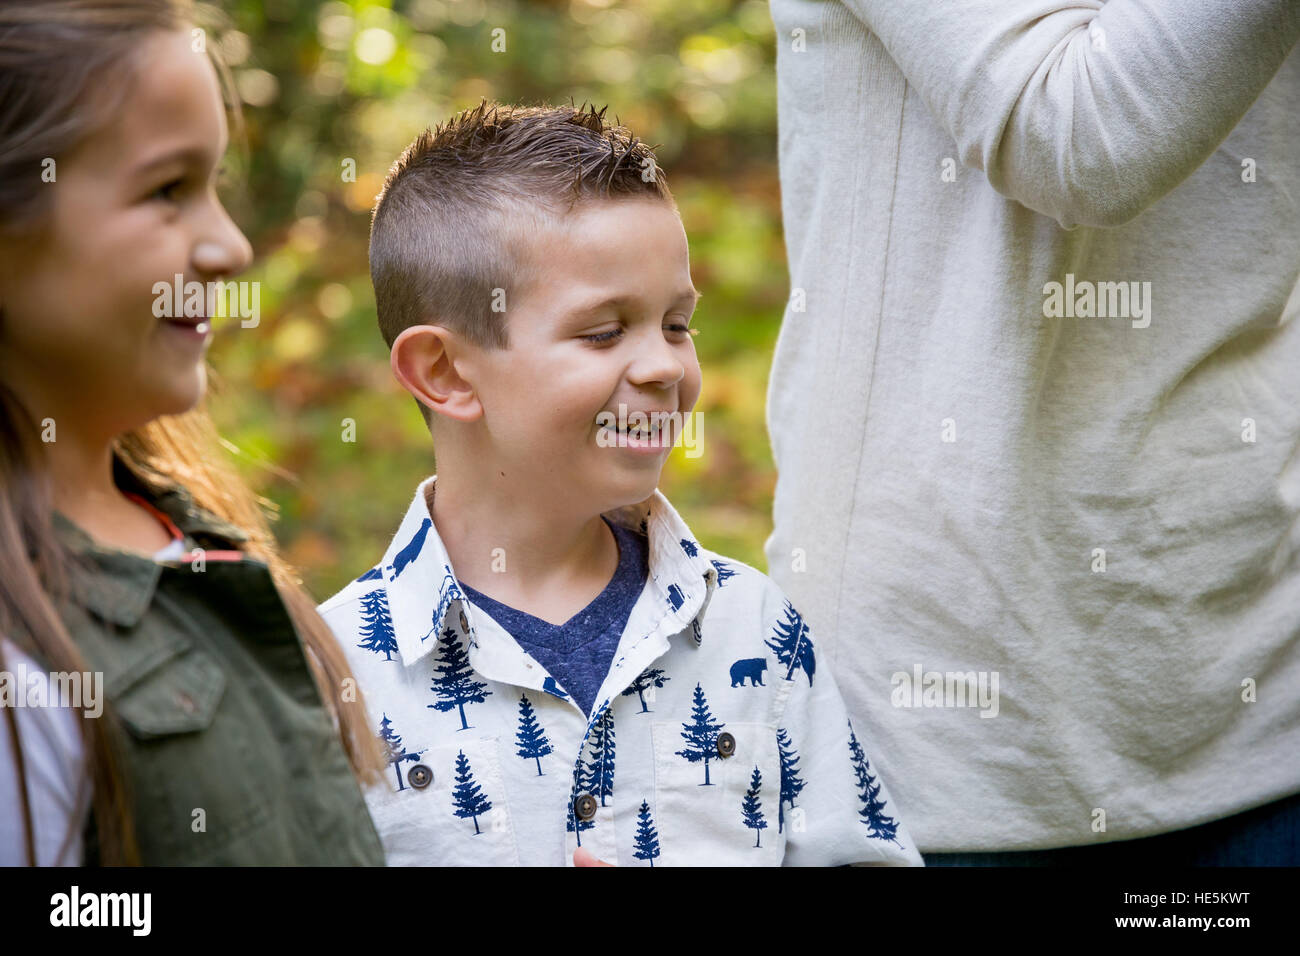 Candid lifestyle portrait of a young boy and his sister laughing and smiling at a nature park. Stock Photo